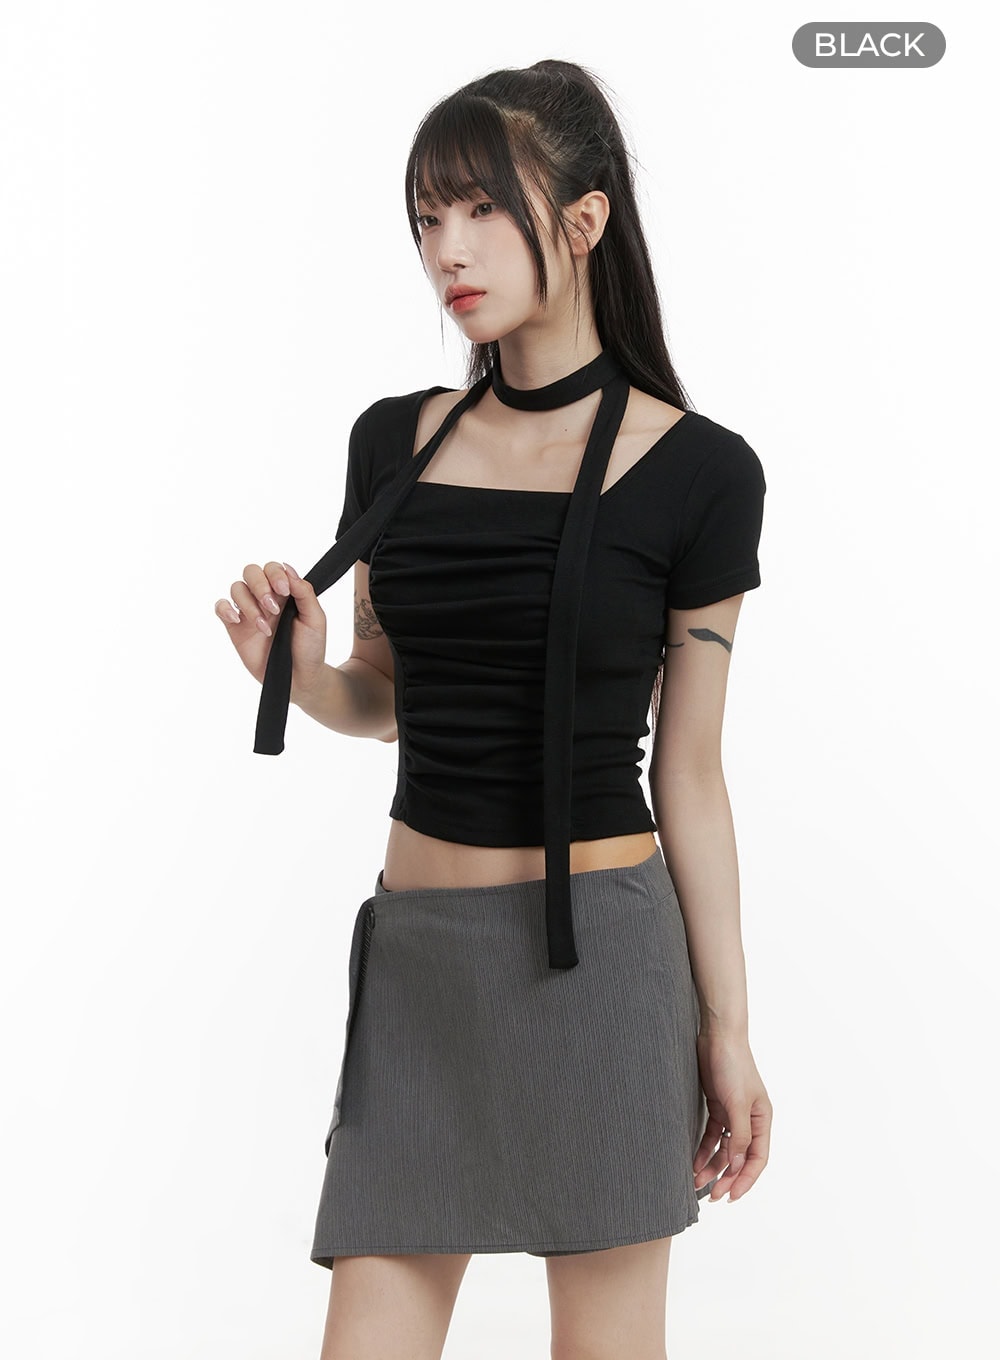 square-neck-shirred-crop-top-with-thin-scarf-cy407 / Black